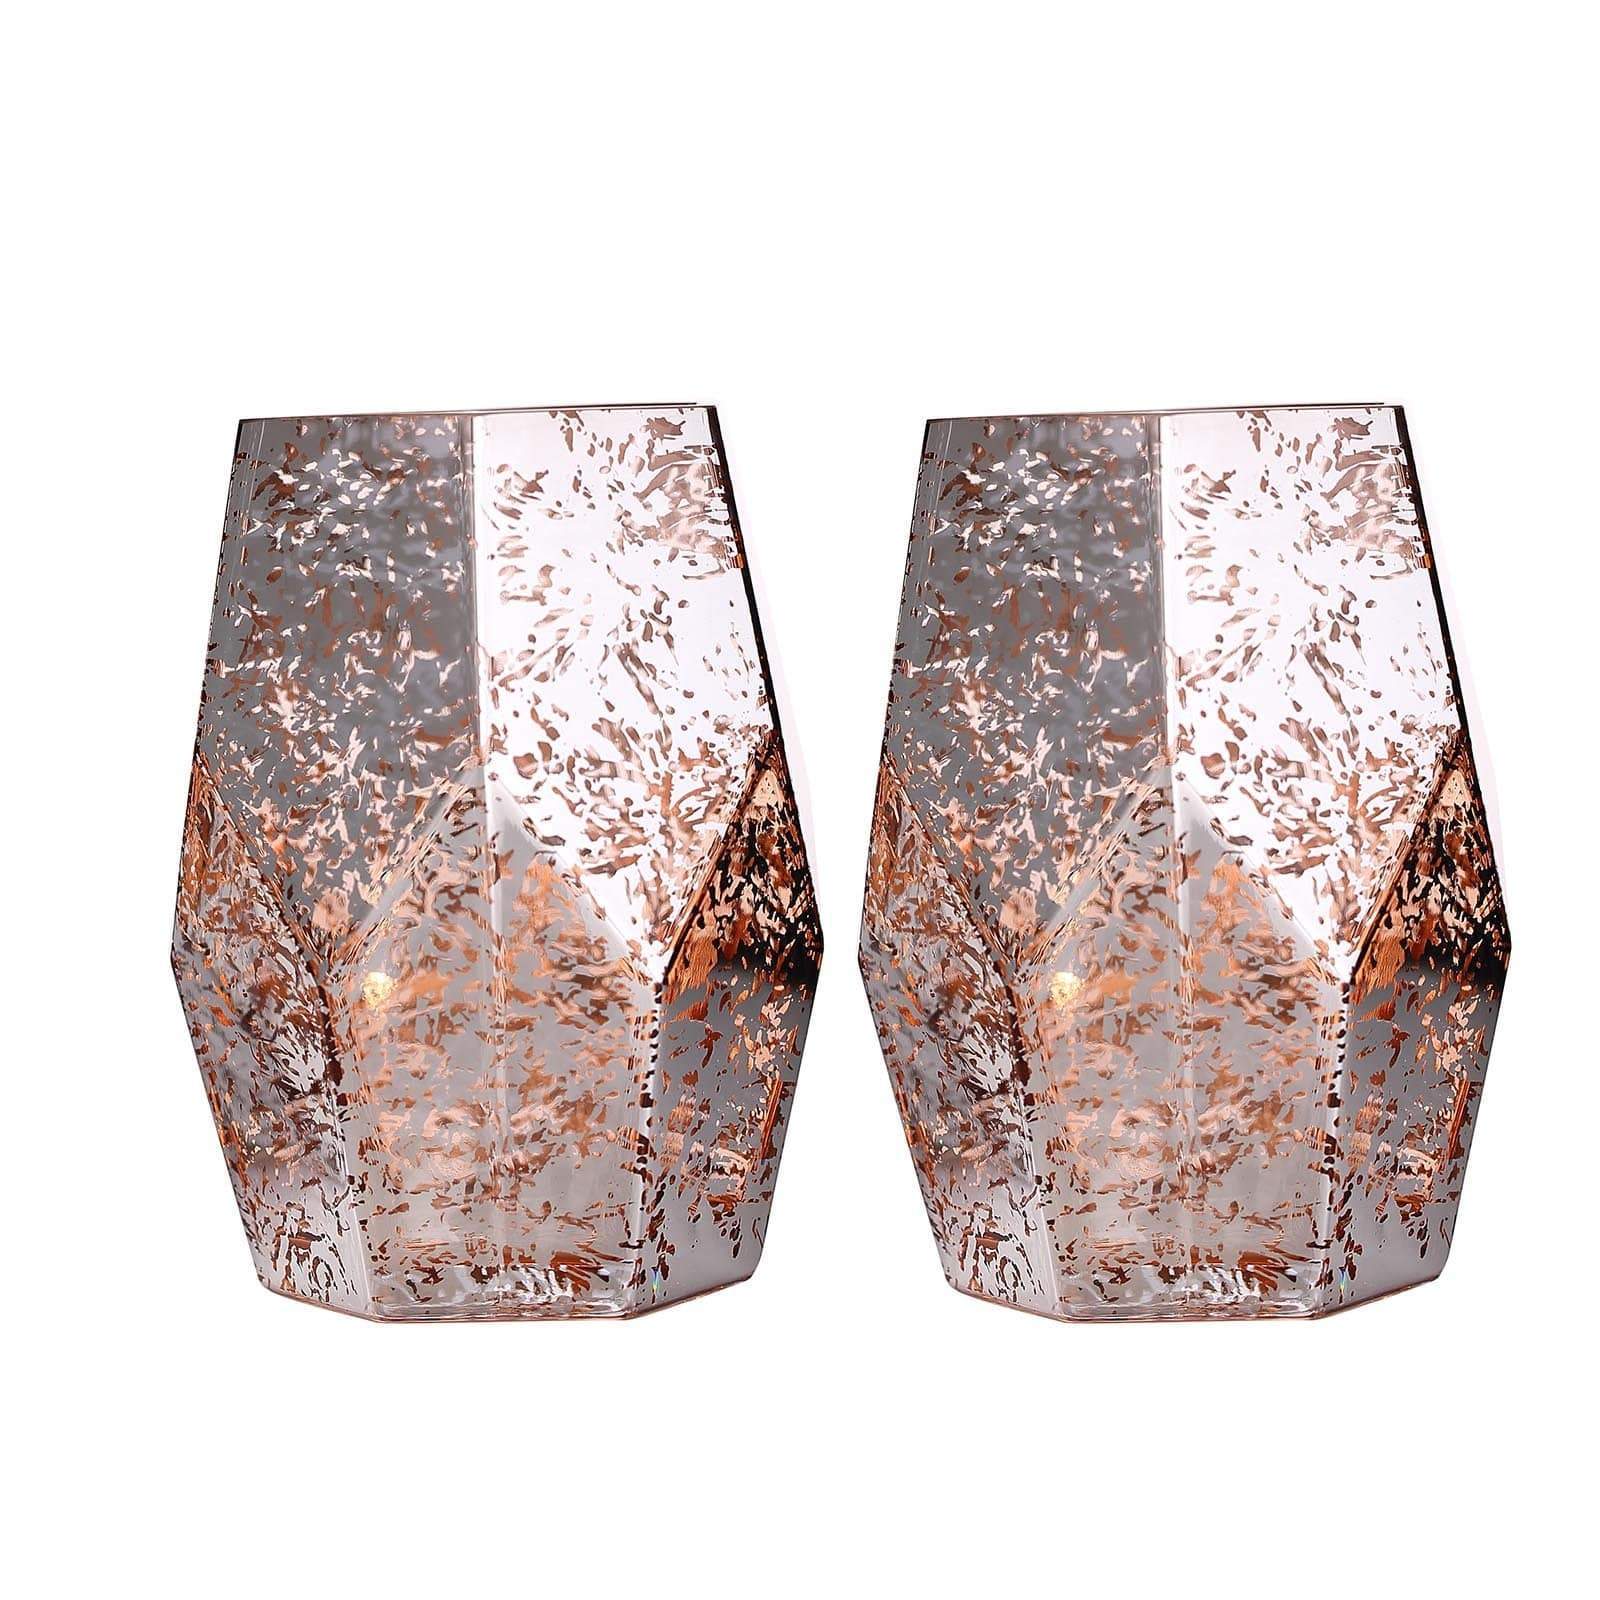 2 pcs 8 in tall Silver with Rose Gold Geometric Mercury Glass Candle Holders Vases Centerpieces